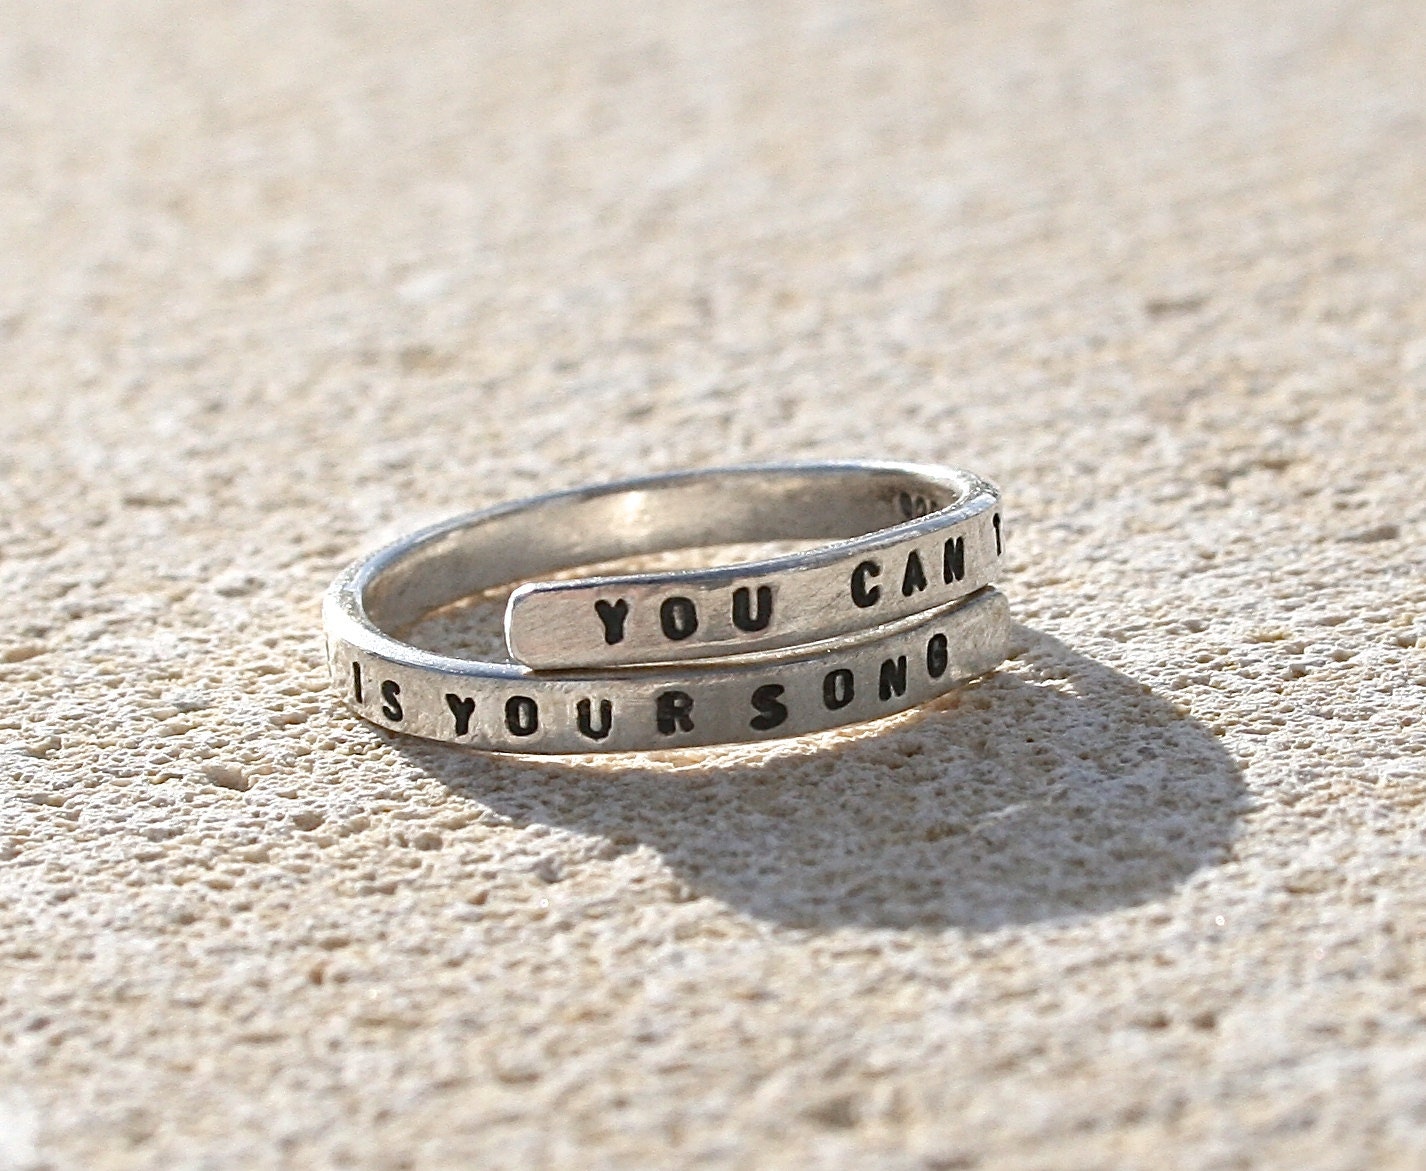 Elton John Lyric ring 'You can tell everybody this is your